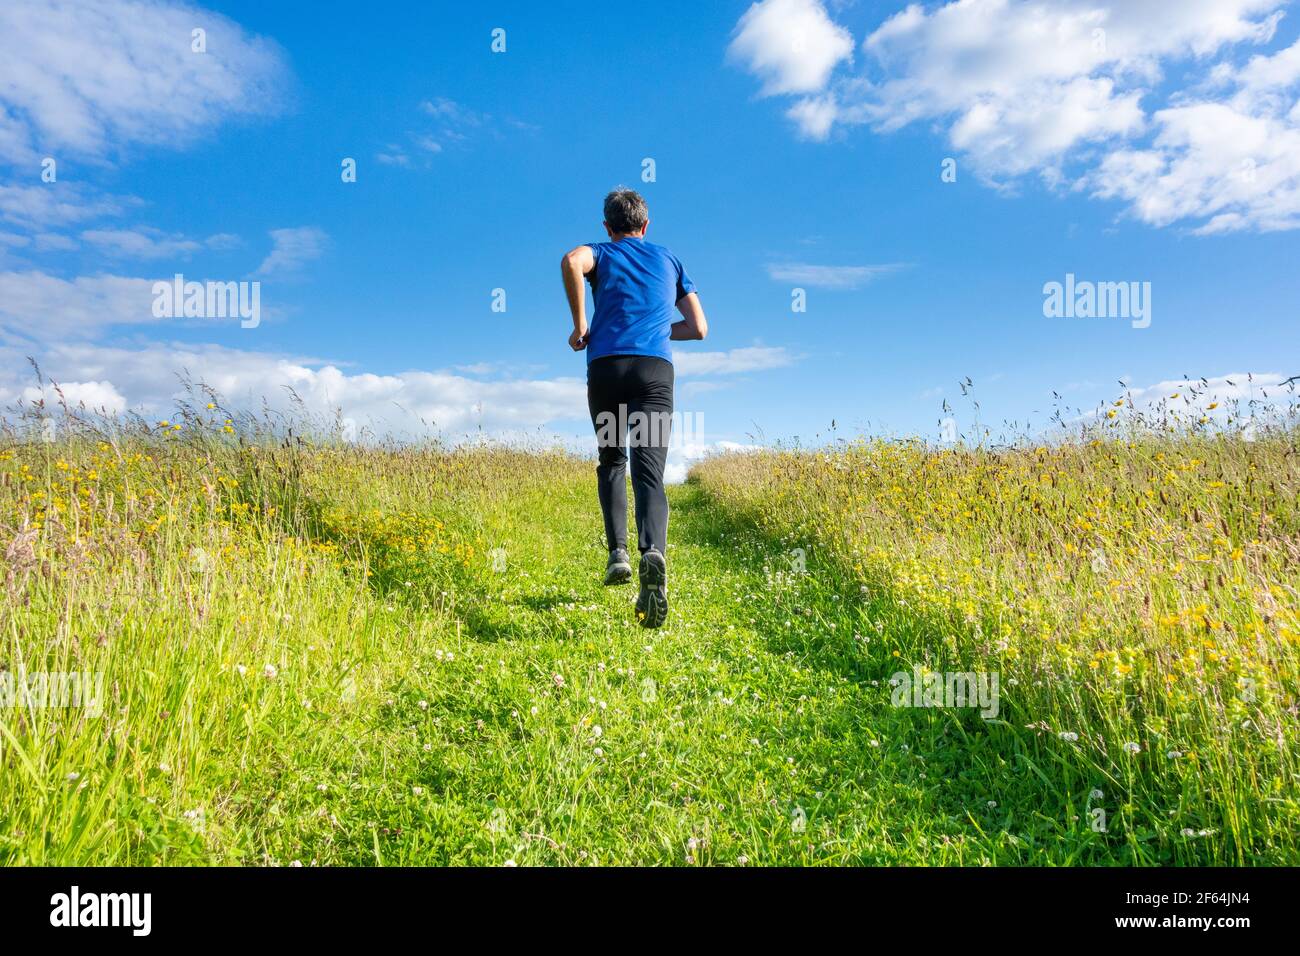 Rear view of mature man running, jogging uphill on grass footpath on hill in countryside. UK Stock Photo